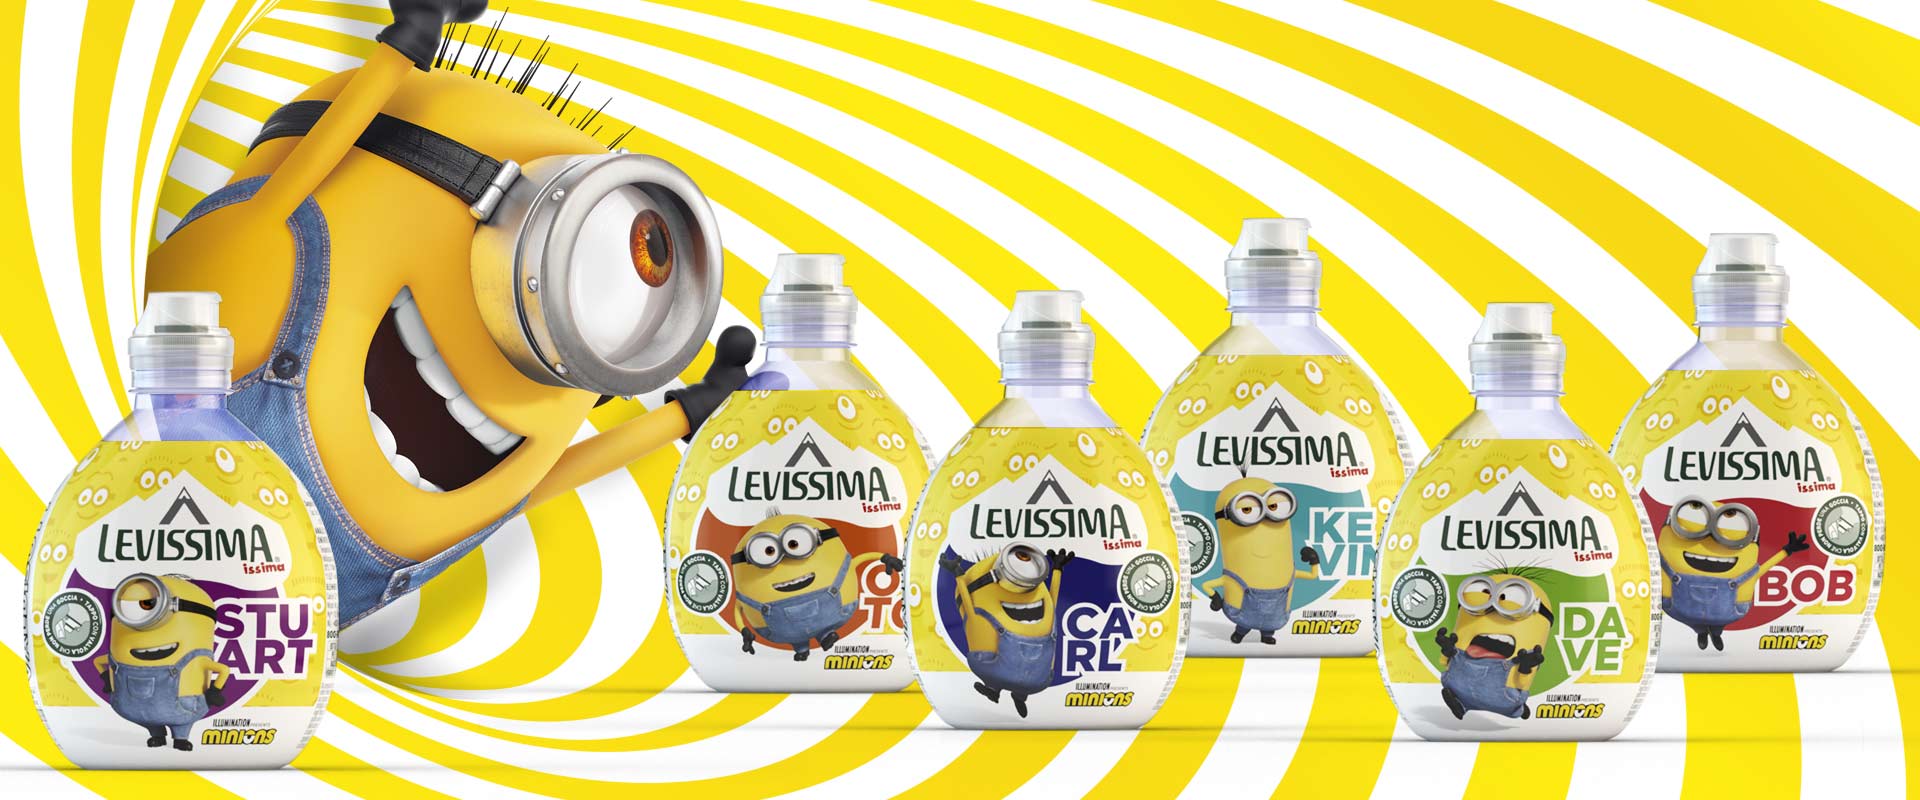 ATC created the Minions special edition of Levissima Issima